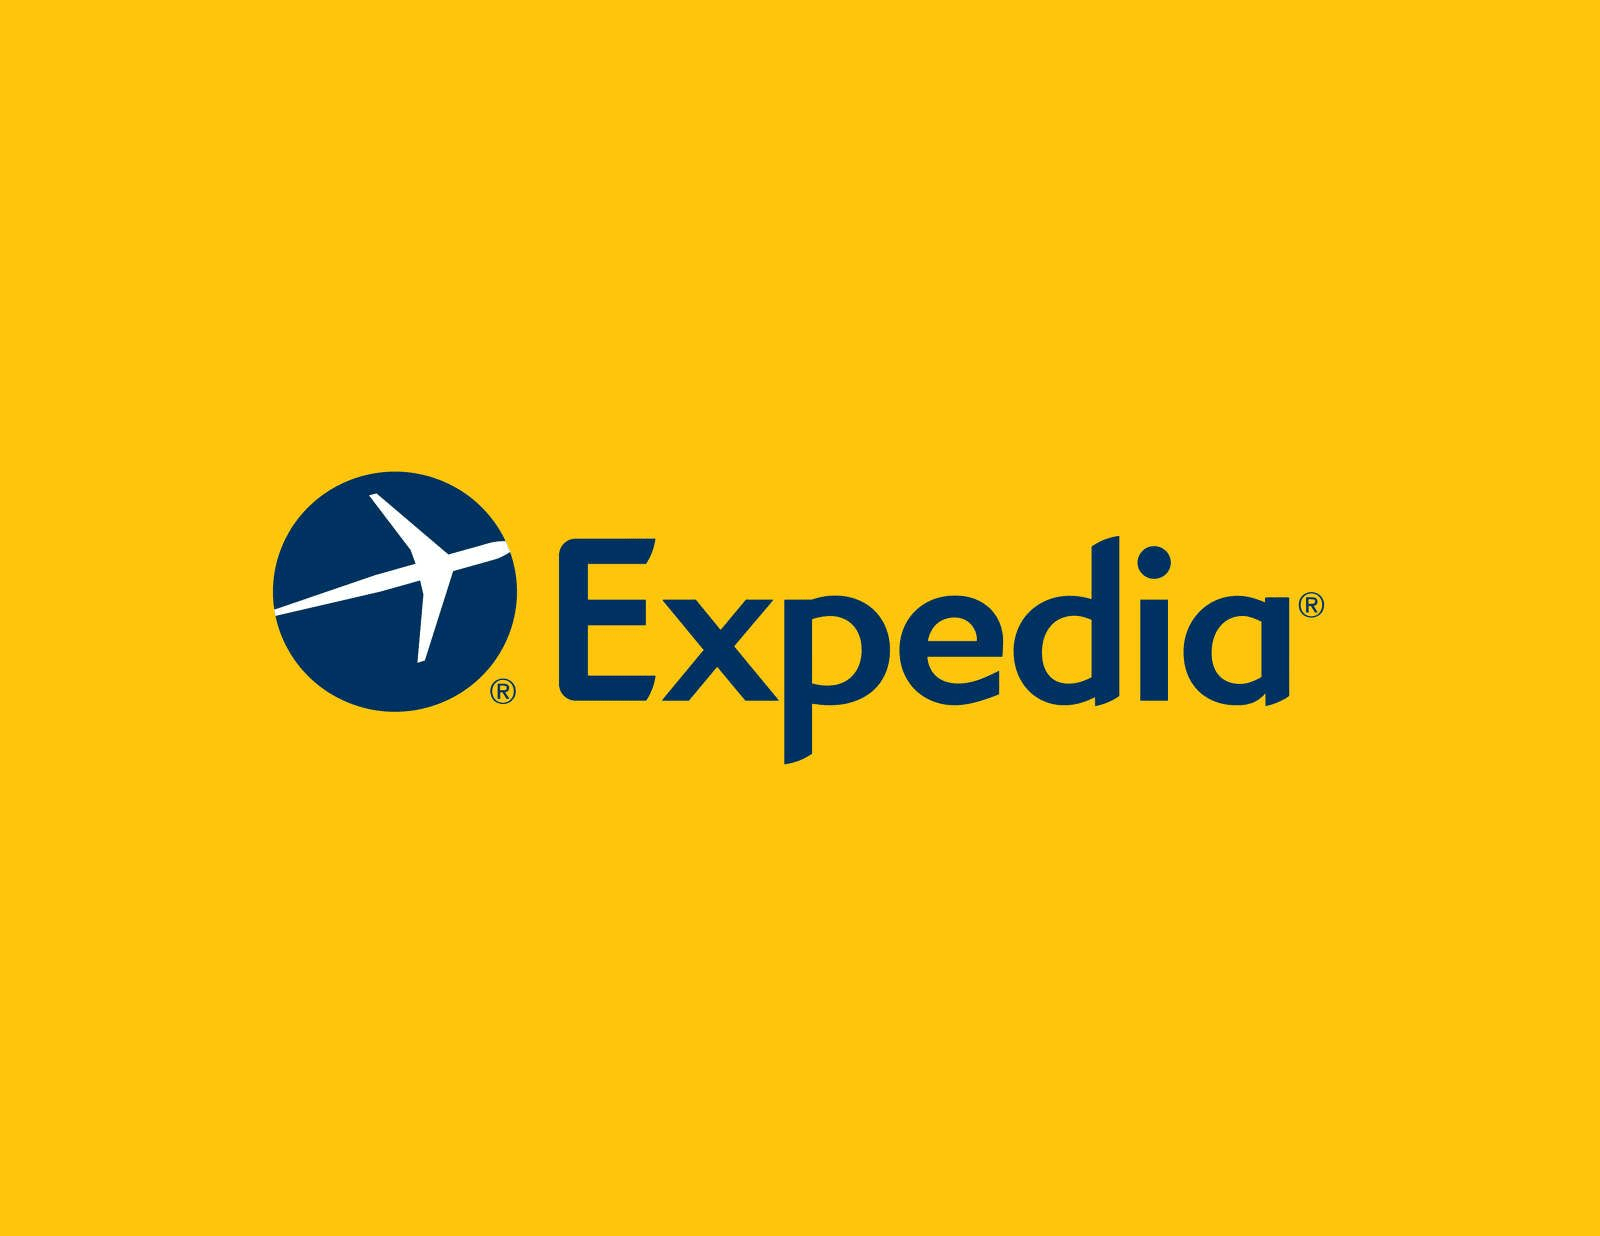 Airbnb-trails-Expedia-in-2021,-an-traders-are-split-on-the-better-in-the-second-half